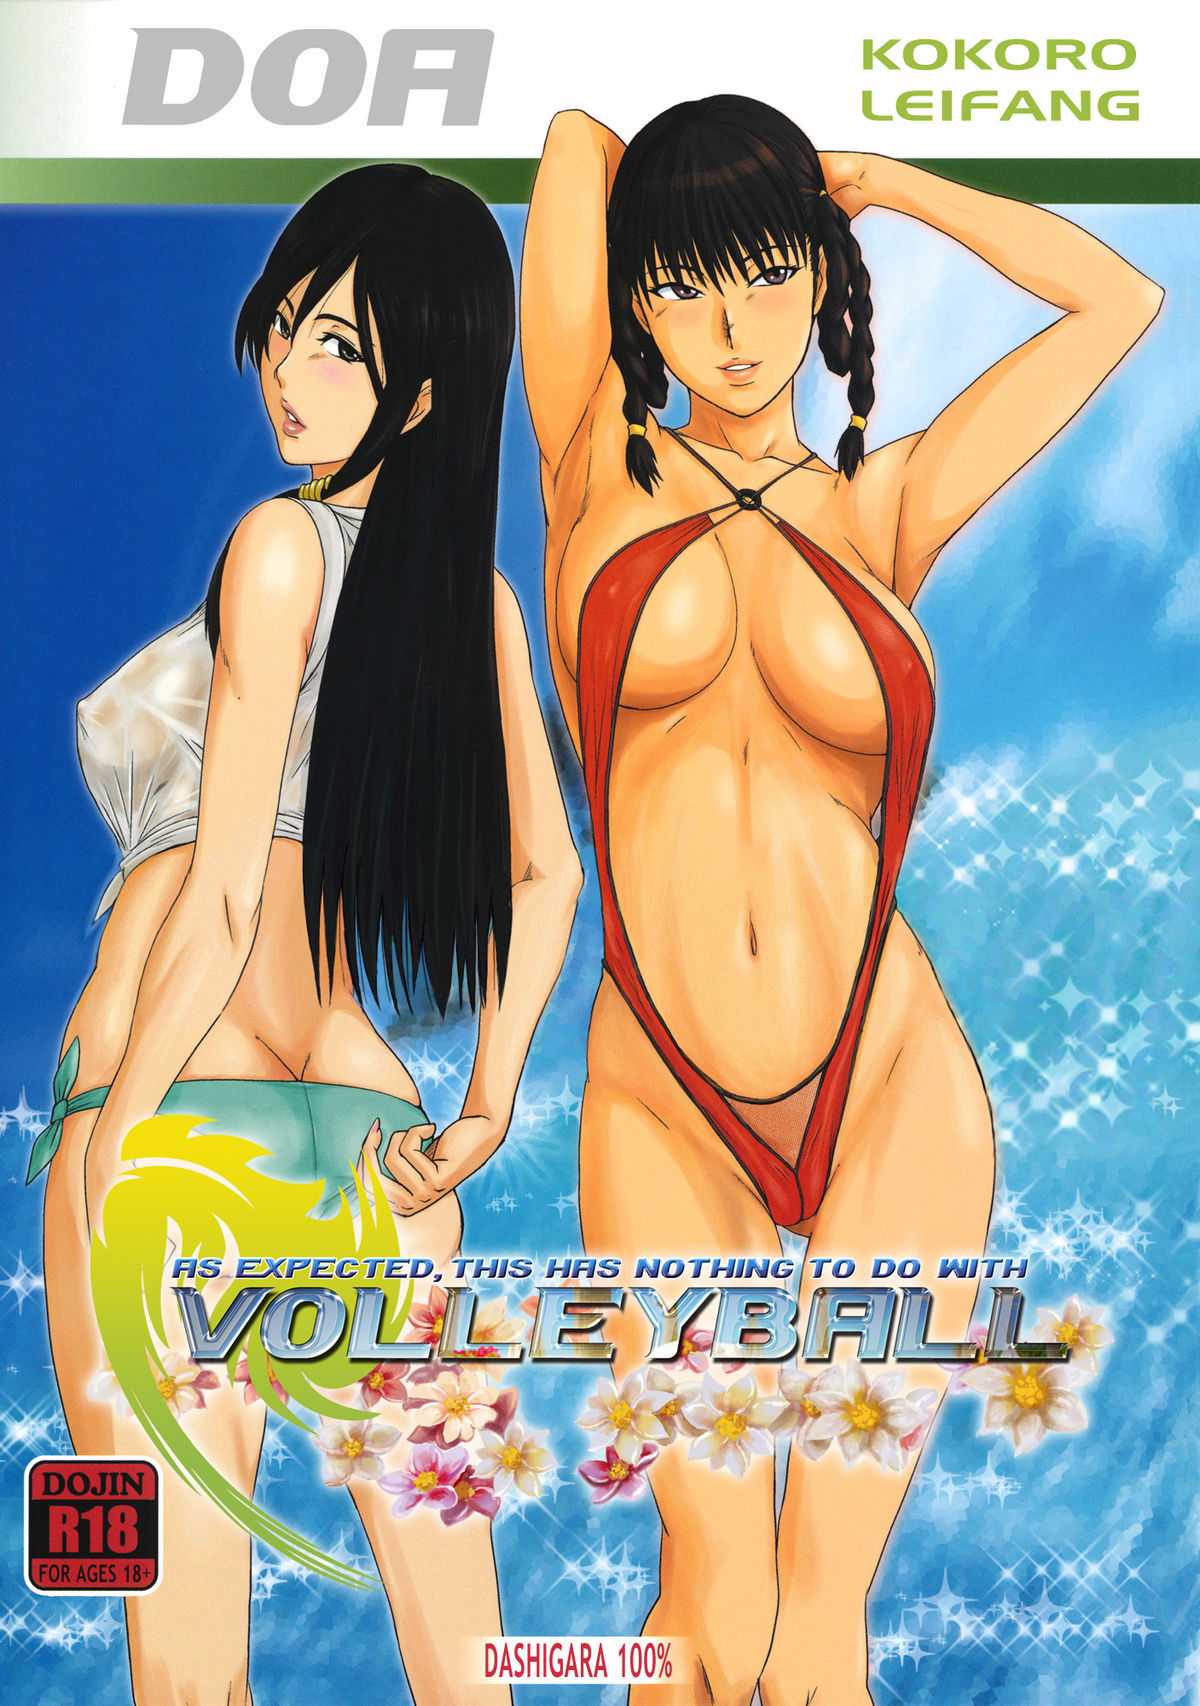 [Dashigara 100%] As Expected, This Has Nothing to do with Volley-Ball [Eng] (Dead or Alive) {doujin-moe.us} 